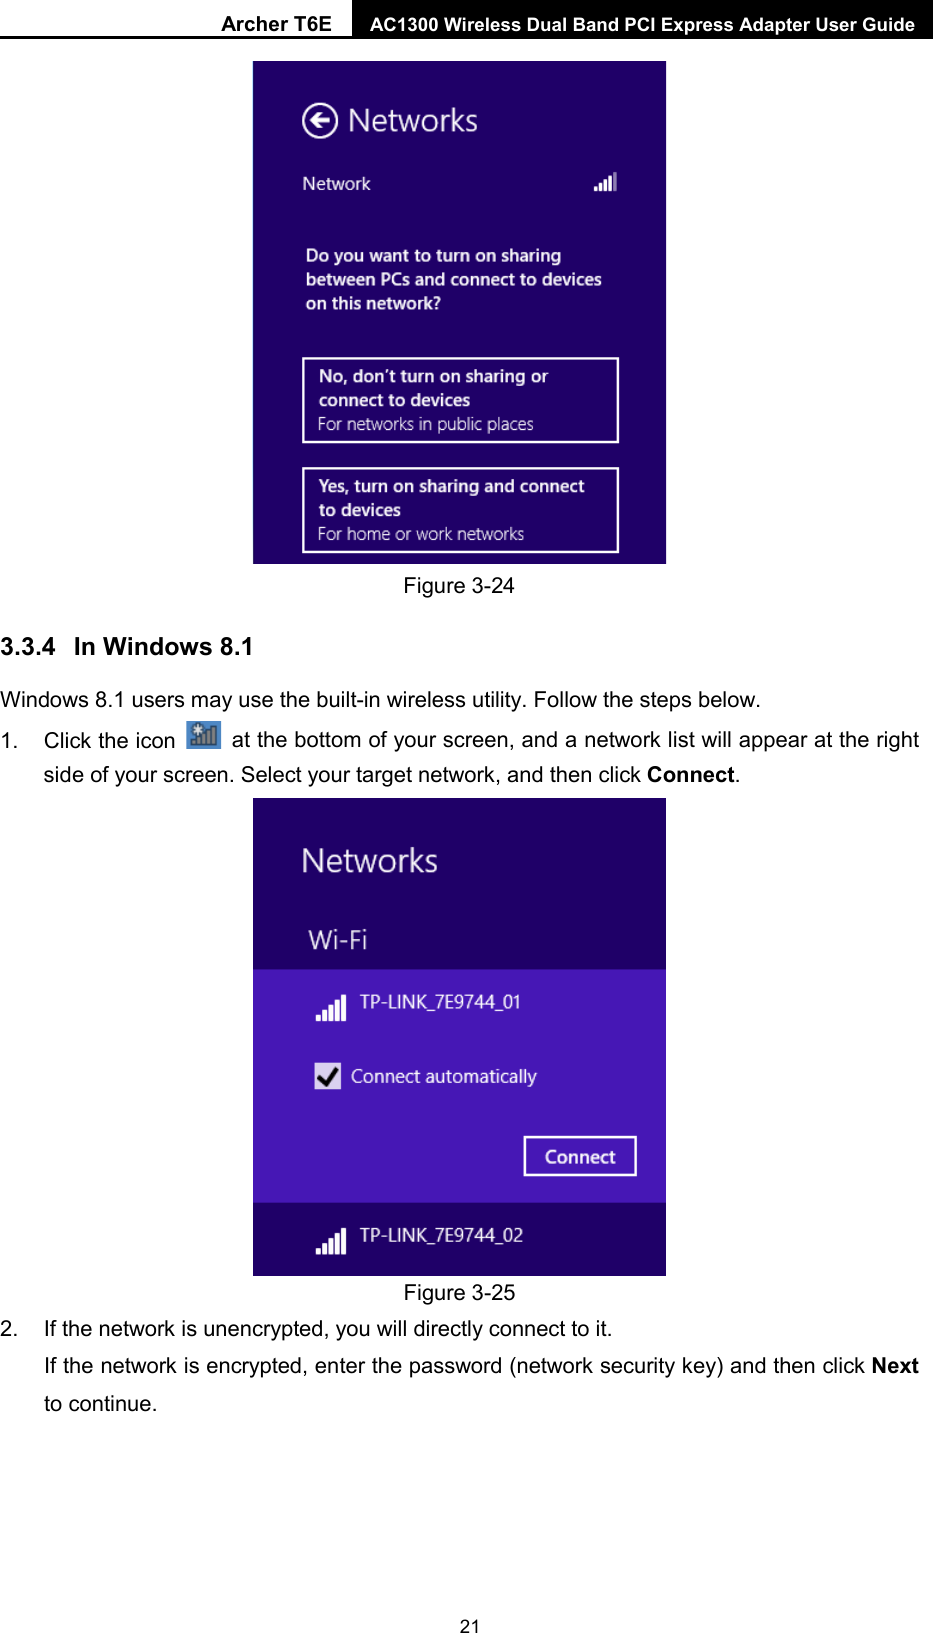 Archer T6E AC1300 Wireless Dual Band PCI Express Adapter User Guide   Figure 3-24 3.3.4 In Windows 8.1 Windows 8.1 users may use the built-in wireless utility. Follow the steps below. 1. Click the icon   at the bottom of your screen, and a network list will appear at the right side of your screen. Select your target network, and then click Connect.  Figure 3-25 2. If the network is unencrypted, you will directly connect to it.   If the network is encrypted, enter the password (network security key) and then click Next to continue. 21  